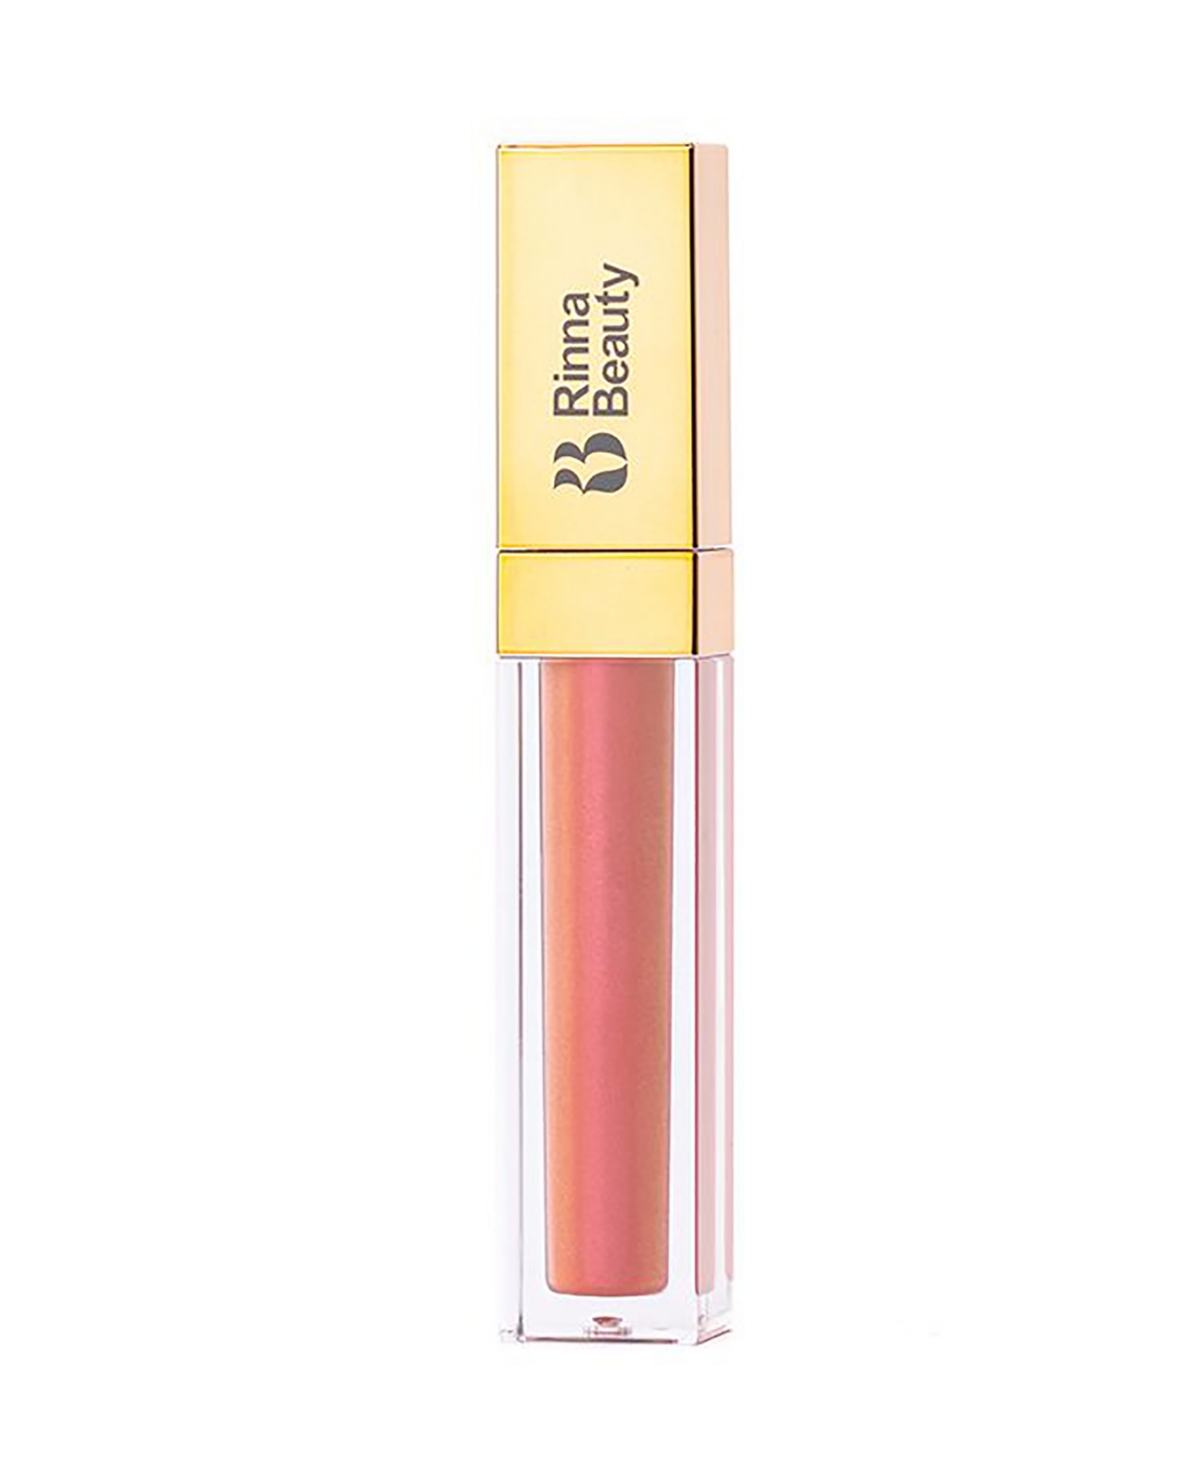 Rinna Beauty Larger Than Life All That Glitters Lip Plumping Gloss, 0.14 Oz. In Attention Seeker (shimmery Red)